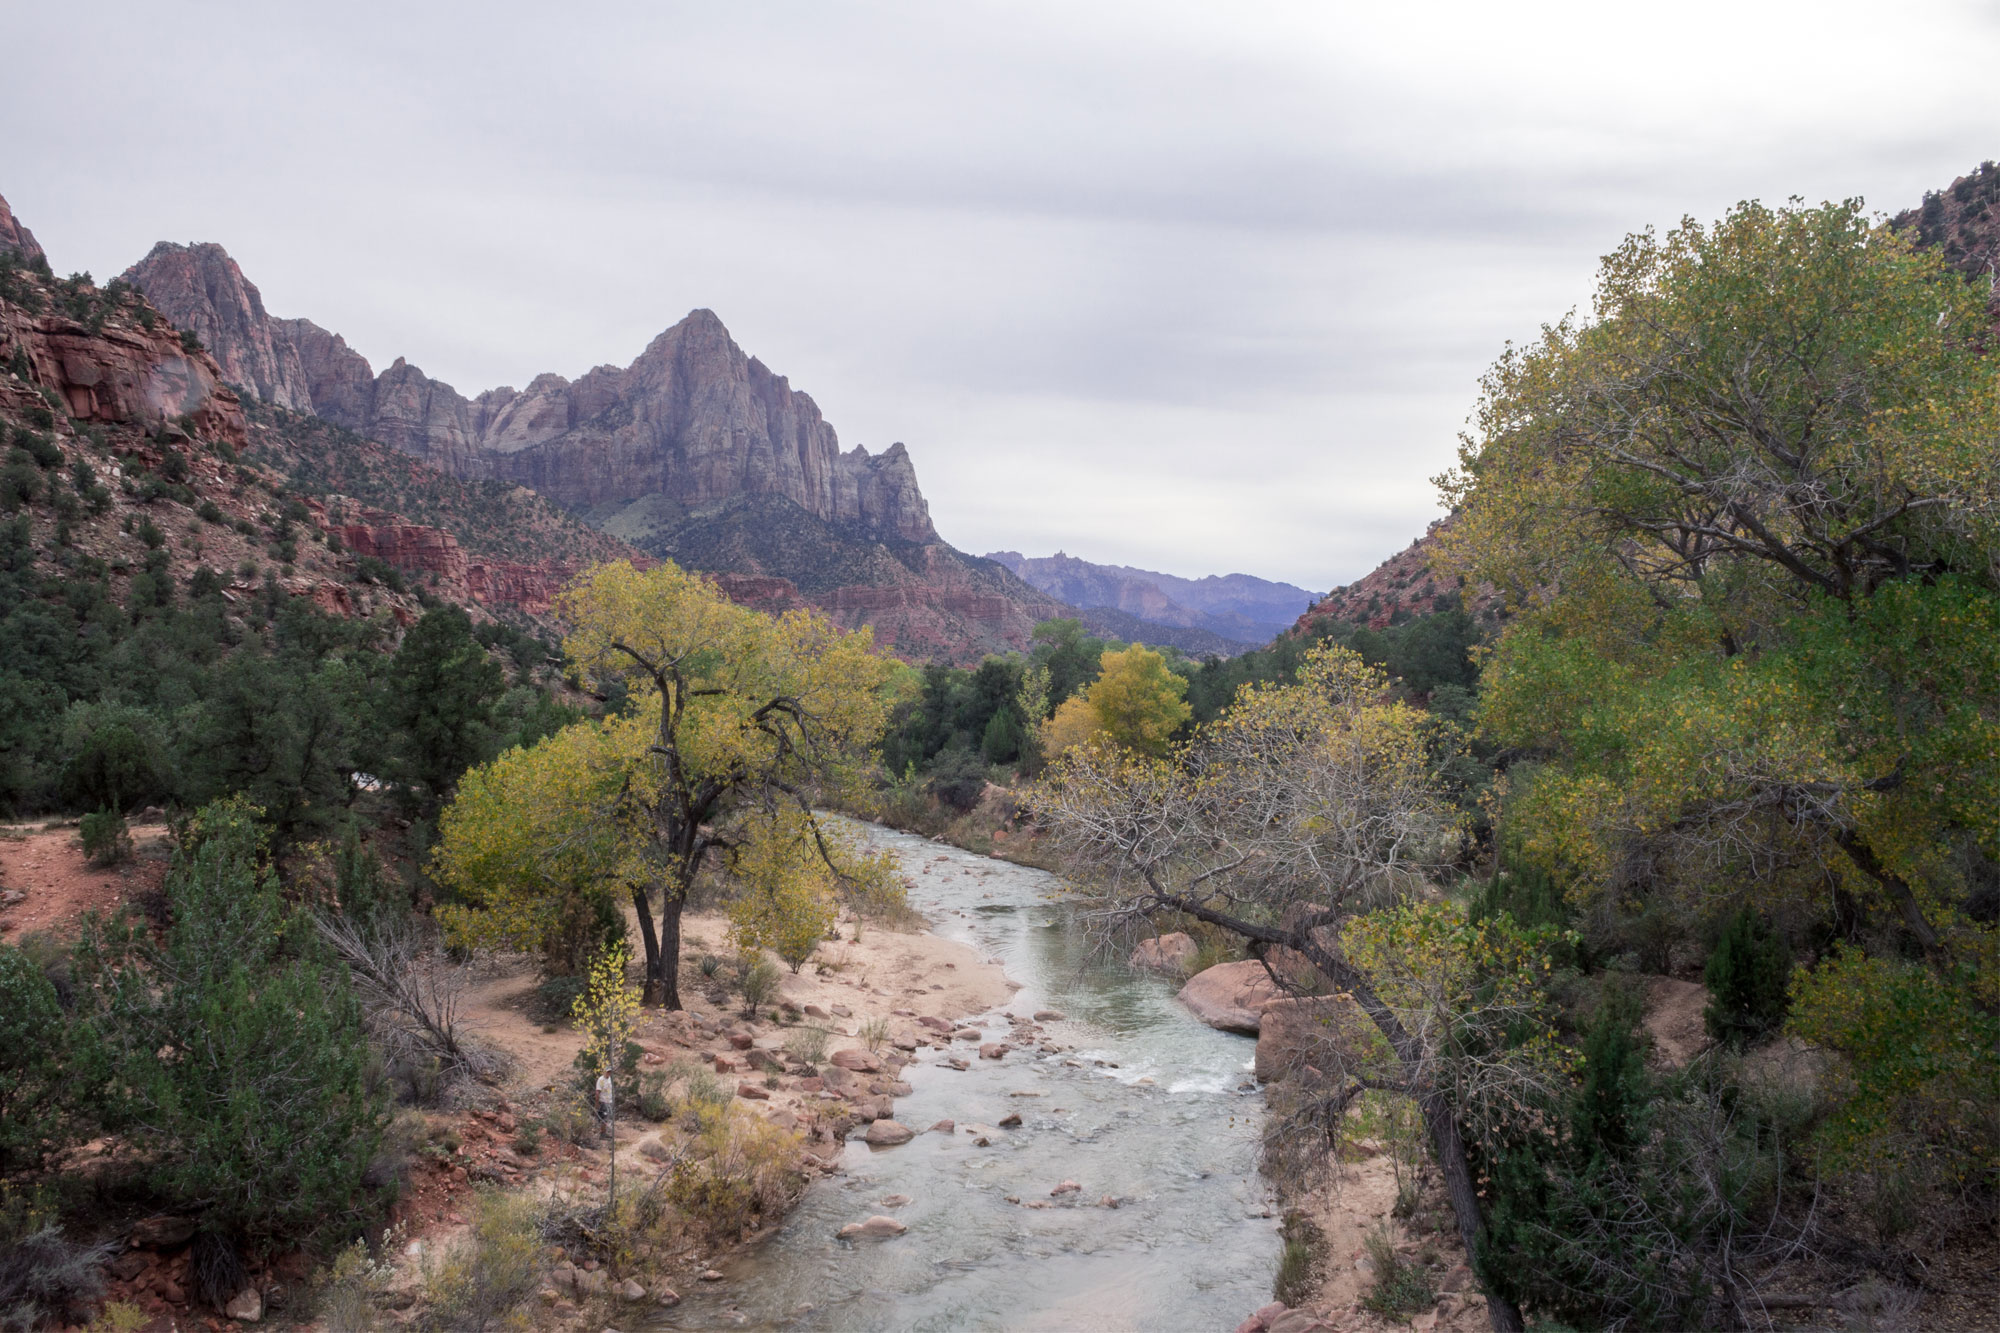 Virgin River from the bridge in Zion National Park